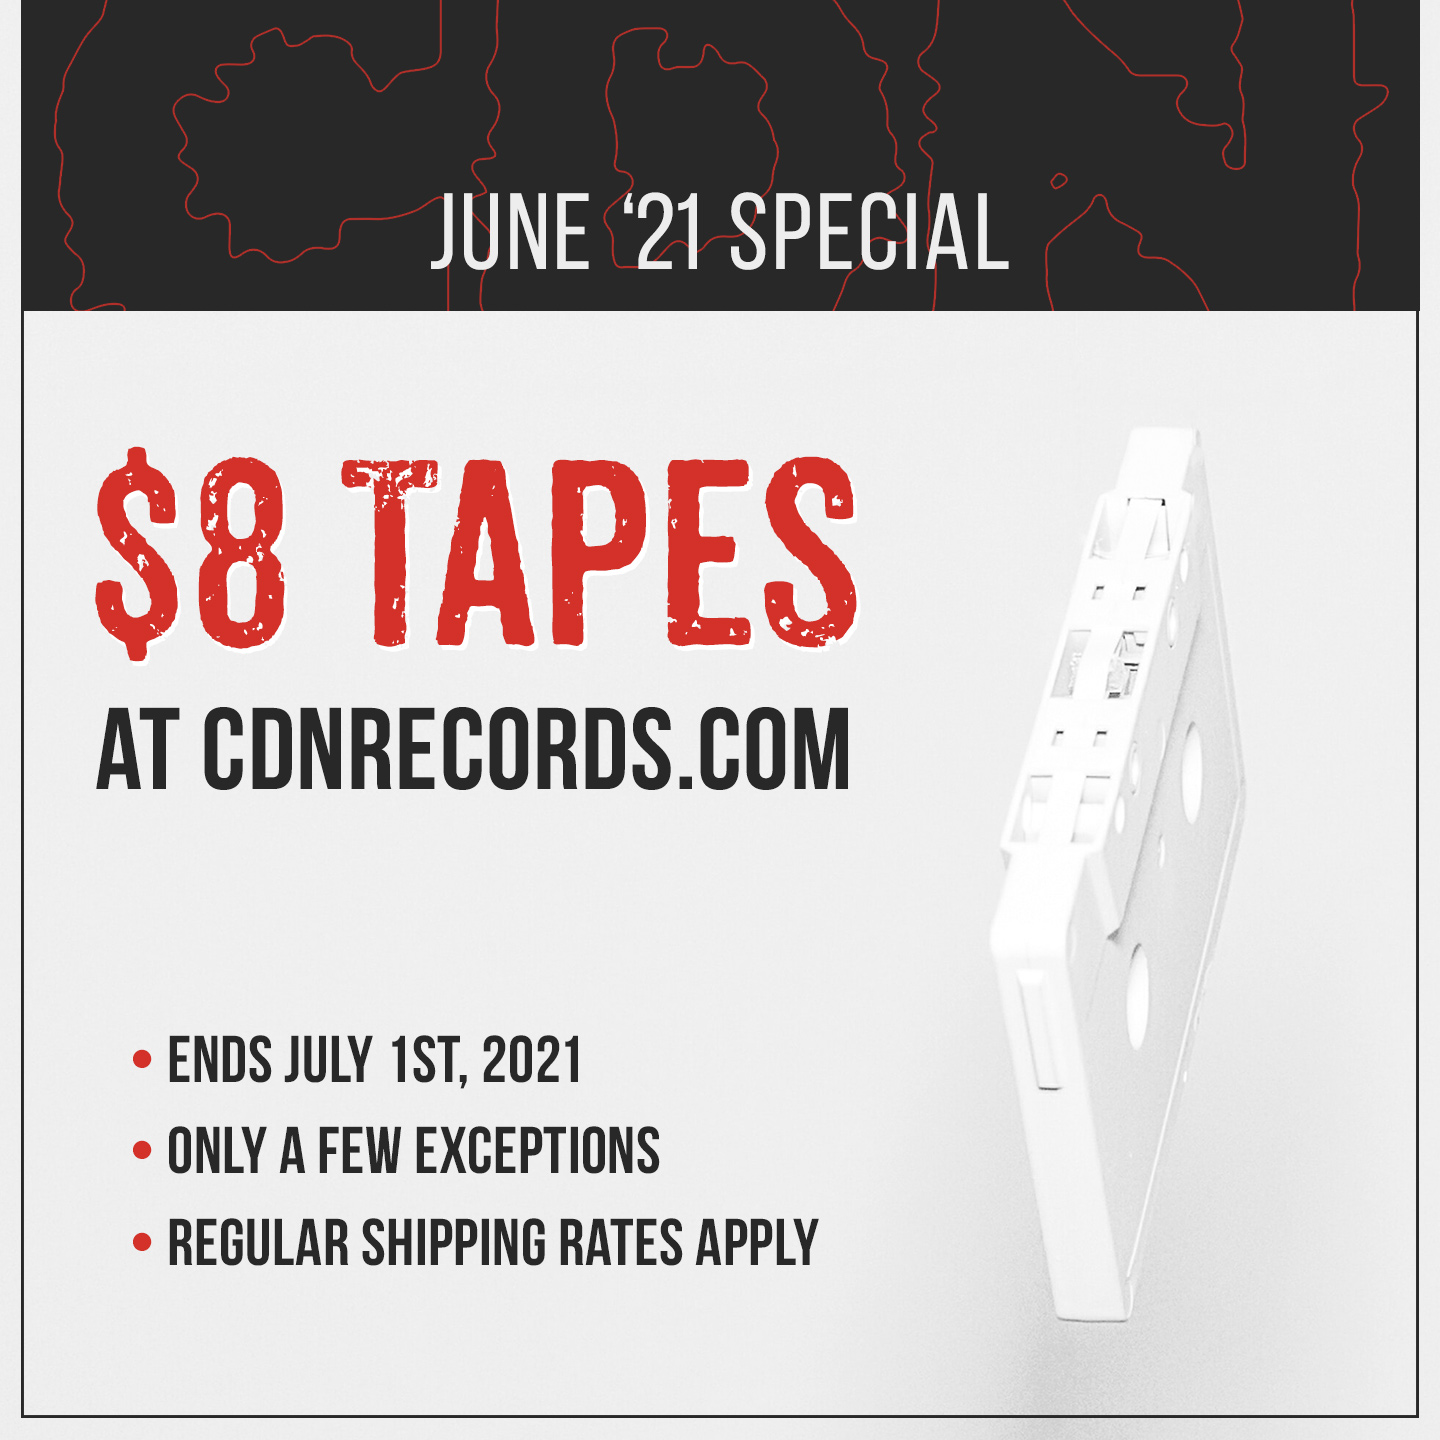 Promo graphic for $8 tapes